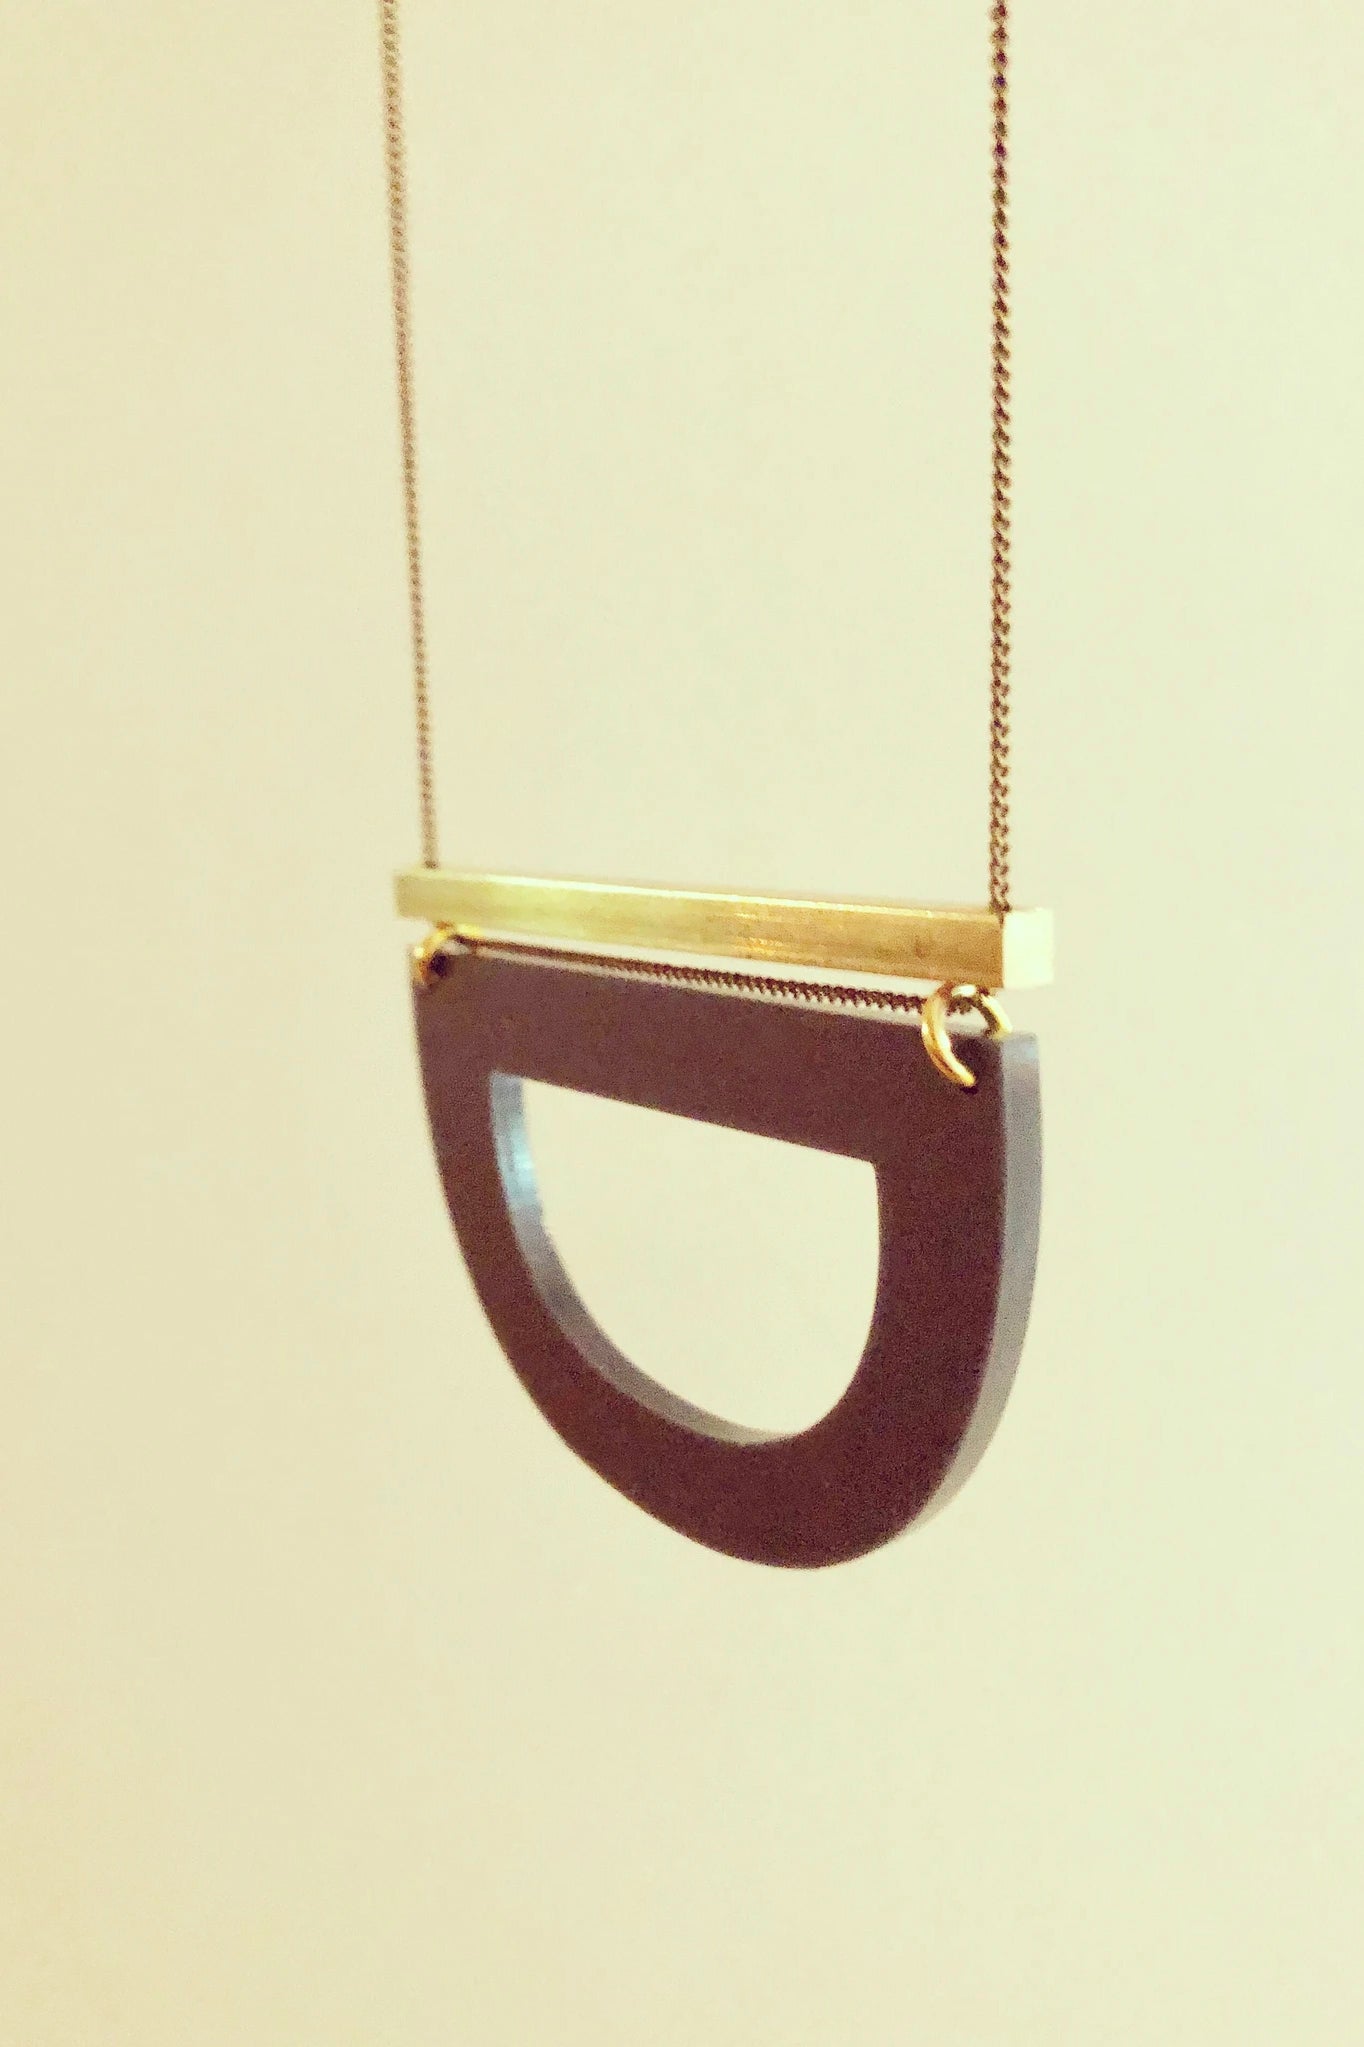 Luppe long necklace by Darlings of Denmark; solid brass horizontal bar and acrylic hollowed out half circle; hanging flat lay